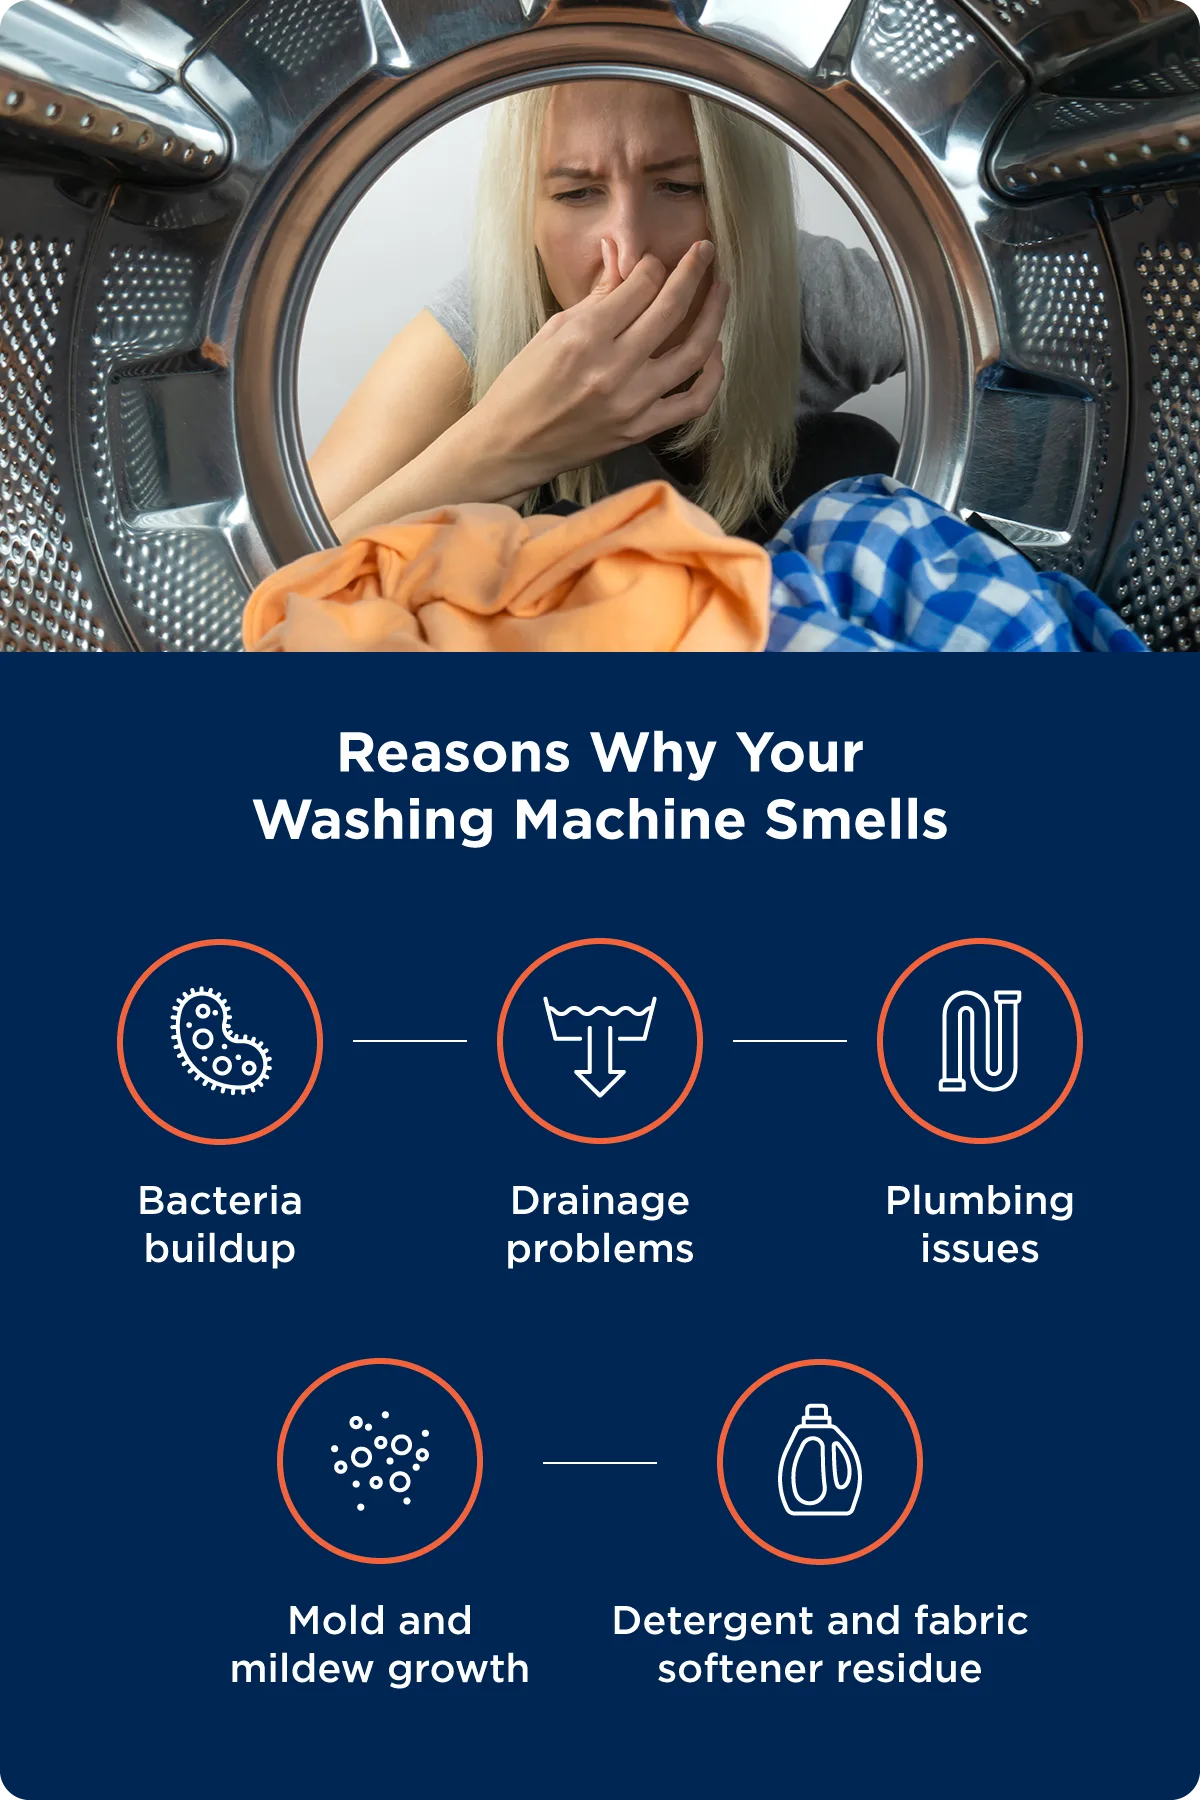 An illustration shows the reasons for washing machine smells.